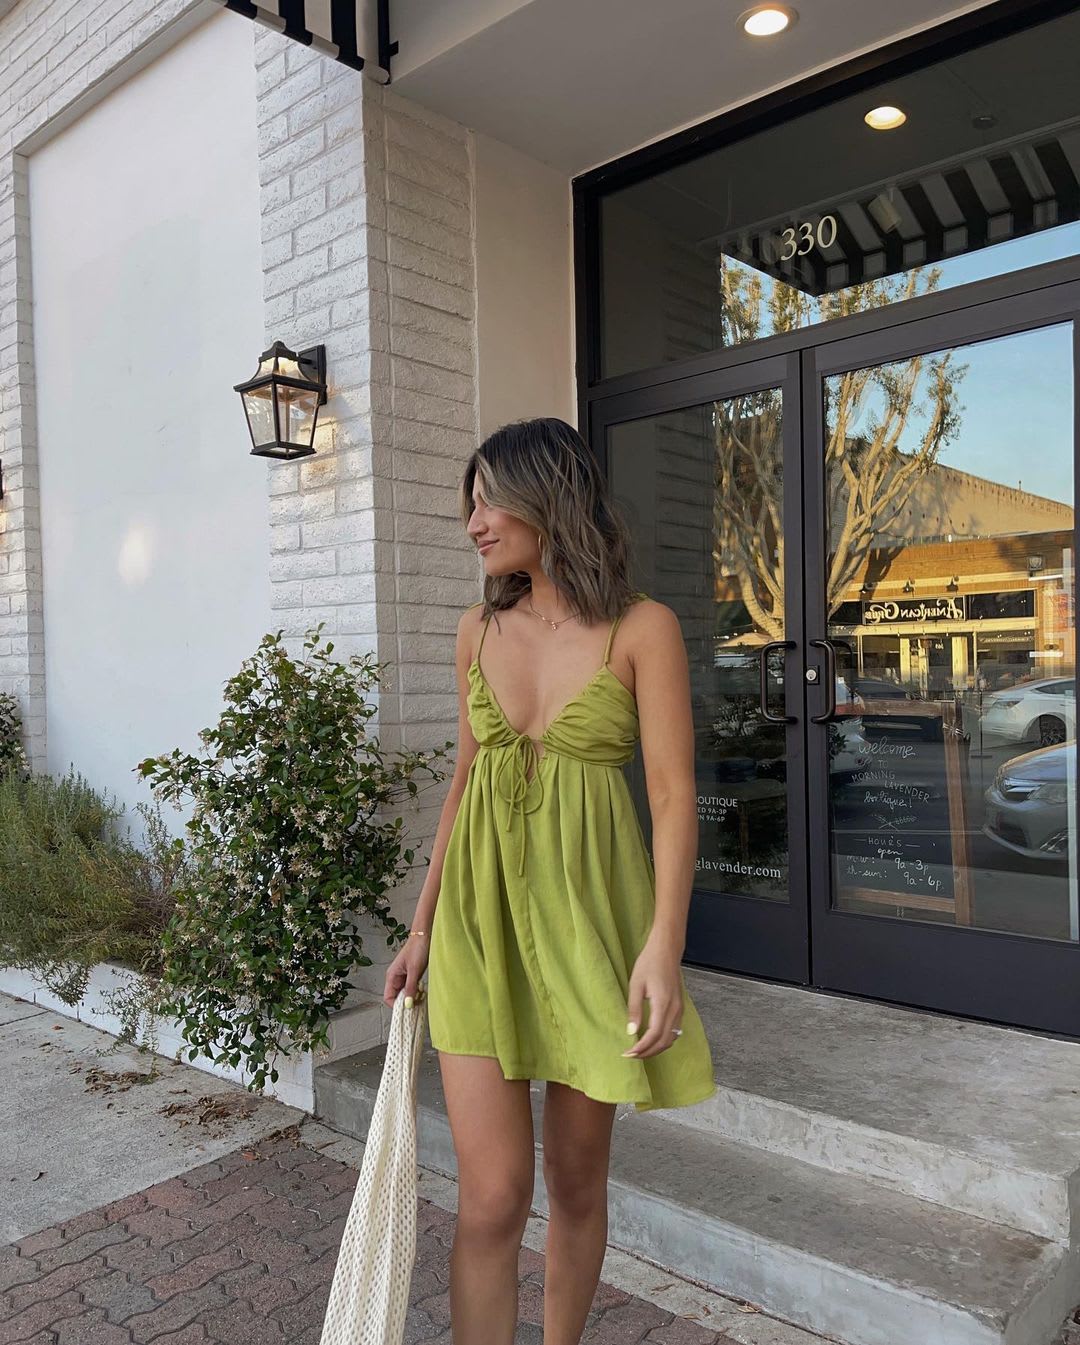 24 Sexy Summer Outfits You'll Want to Copy In 2023 - Lulus.com Fashion Blog